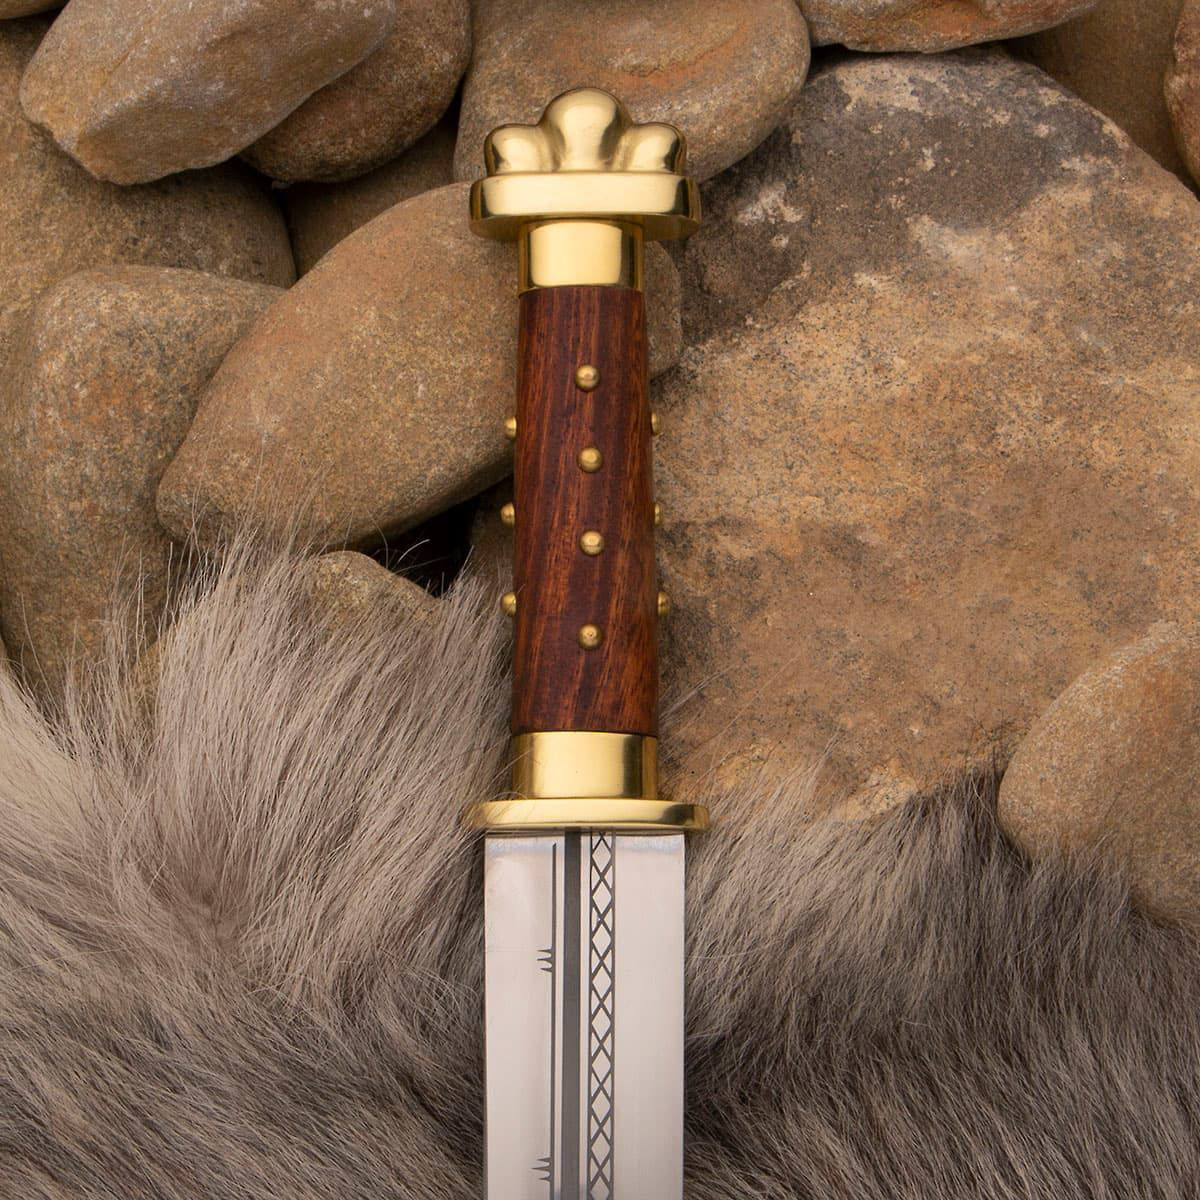 Circa 750 Replica Seax with sharp high carbon steel blade and wood grip with brass tacks, brass guard and brass pommel